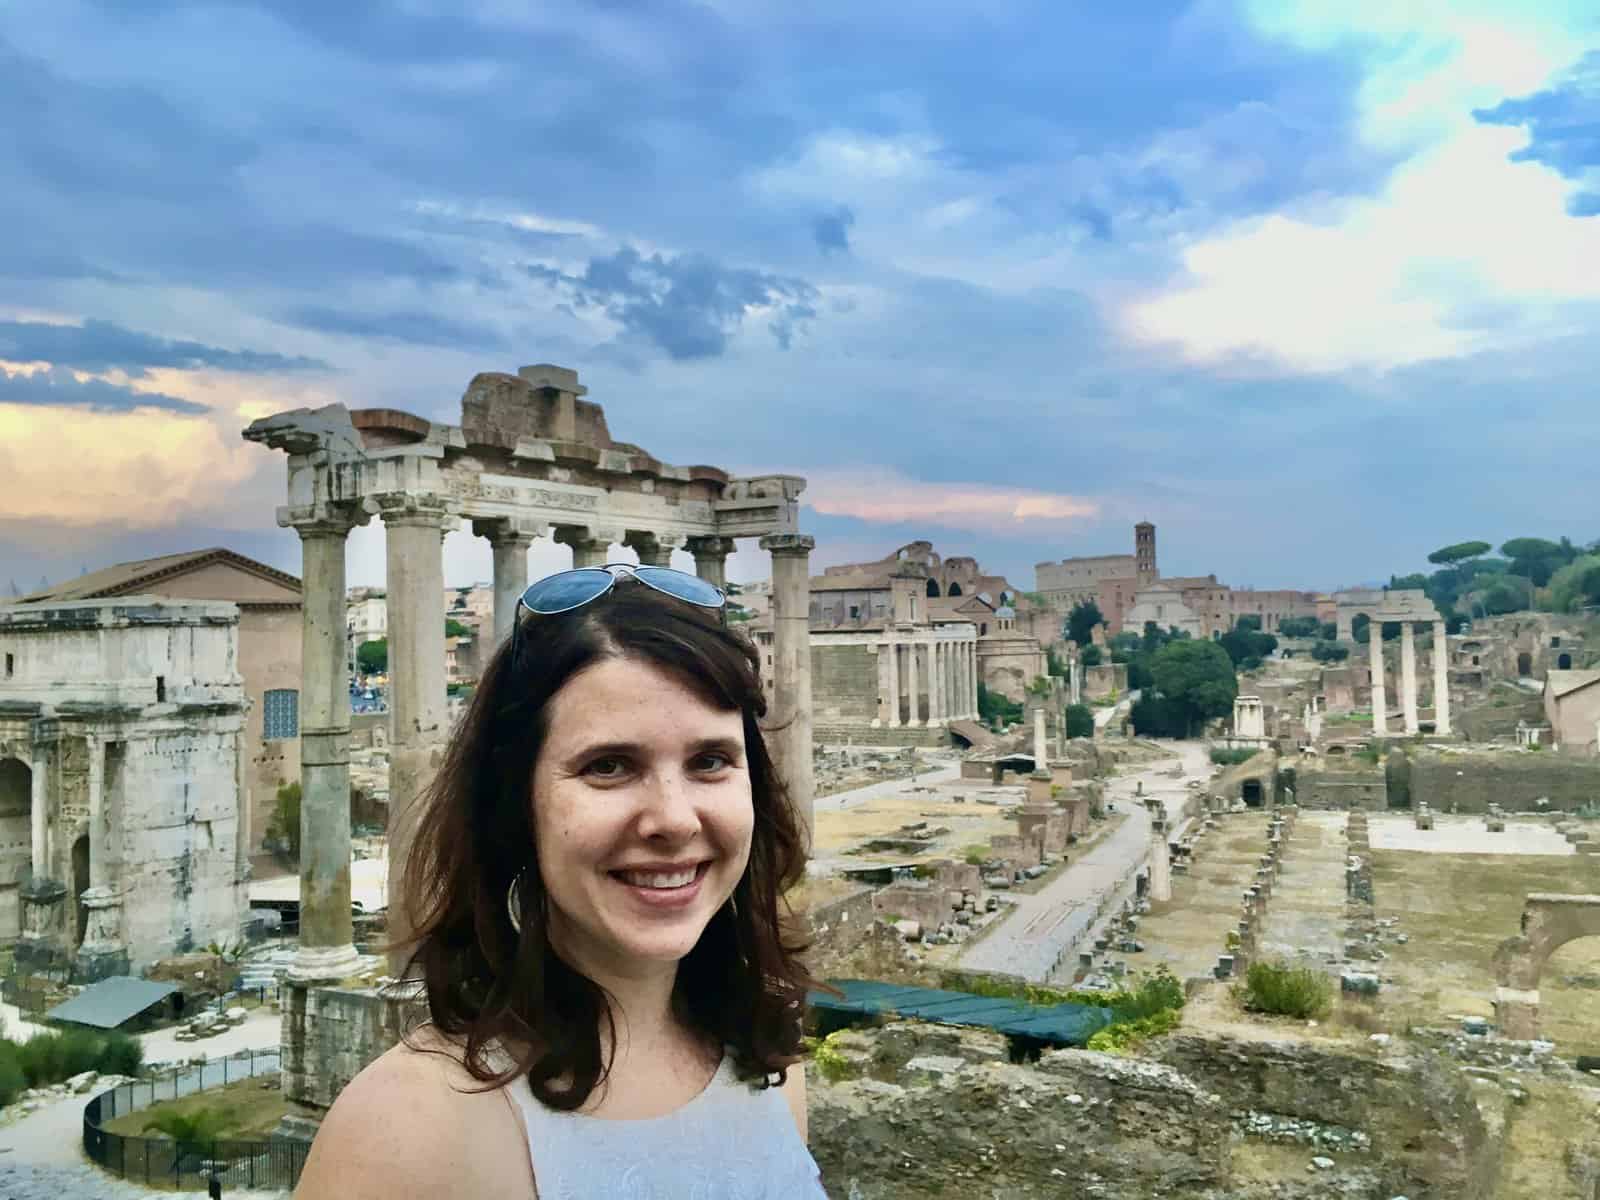 Heather in front of the Roman Forum